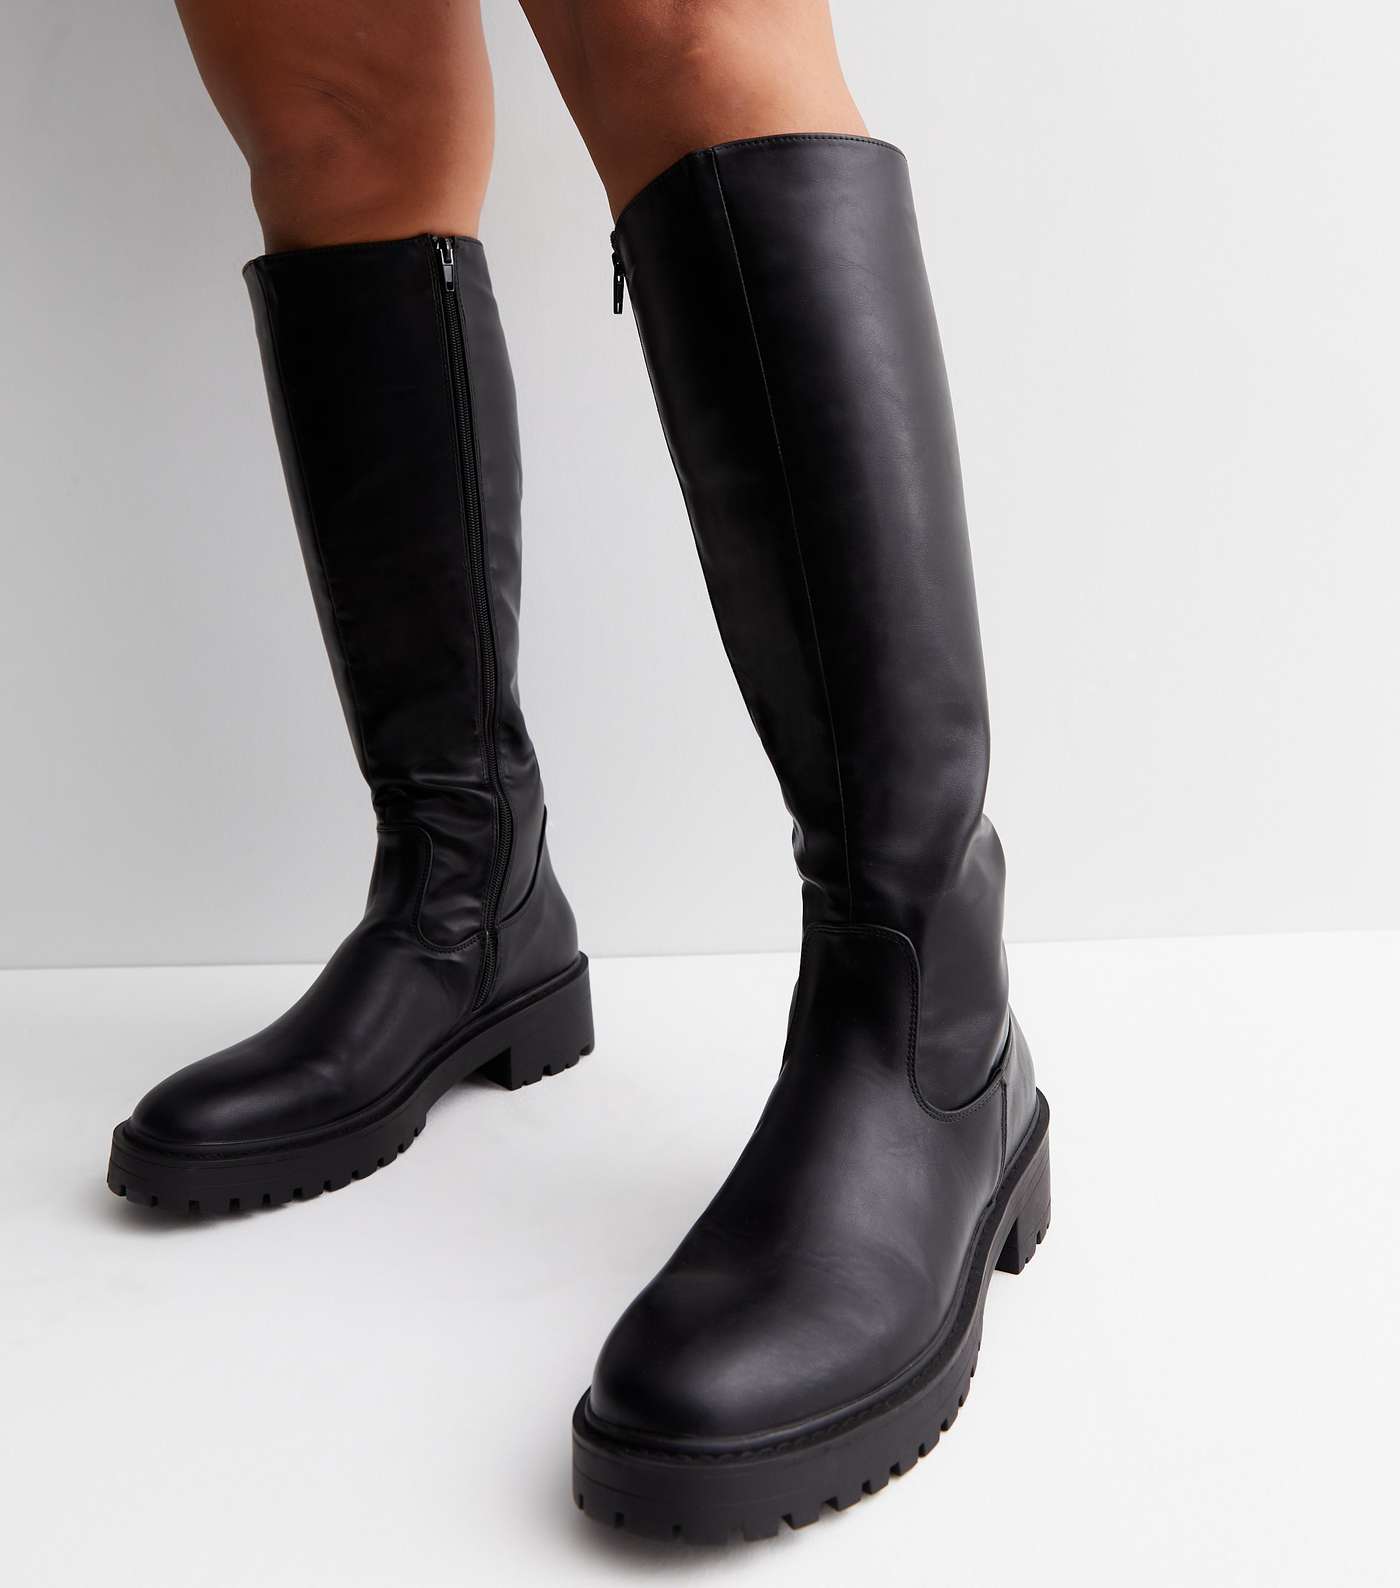 Black Leather-Look Knee High Chunky Boots Image 2